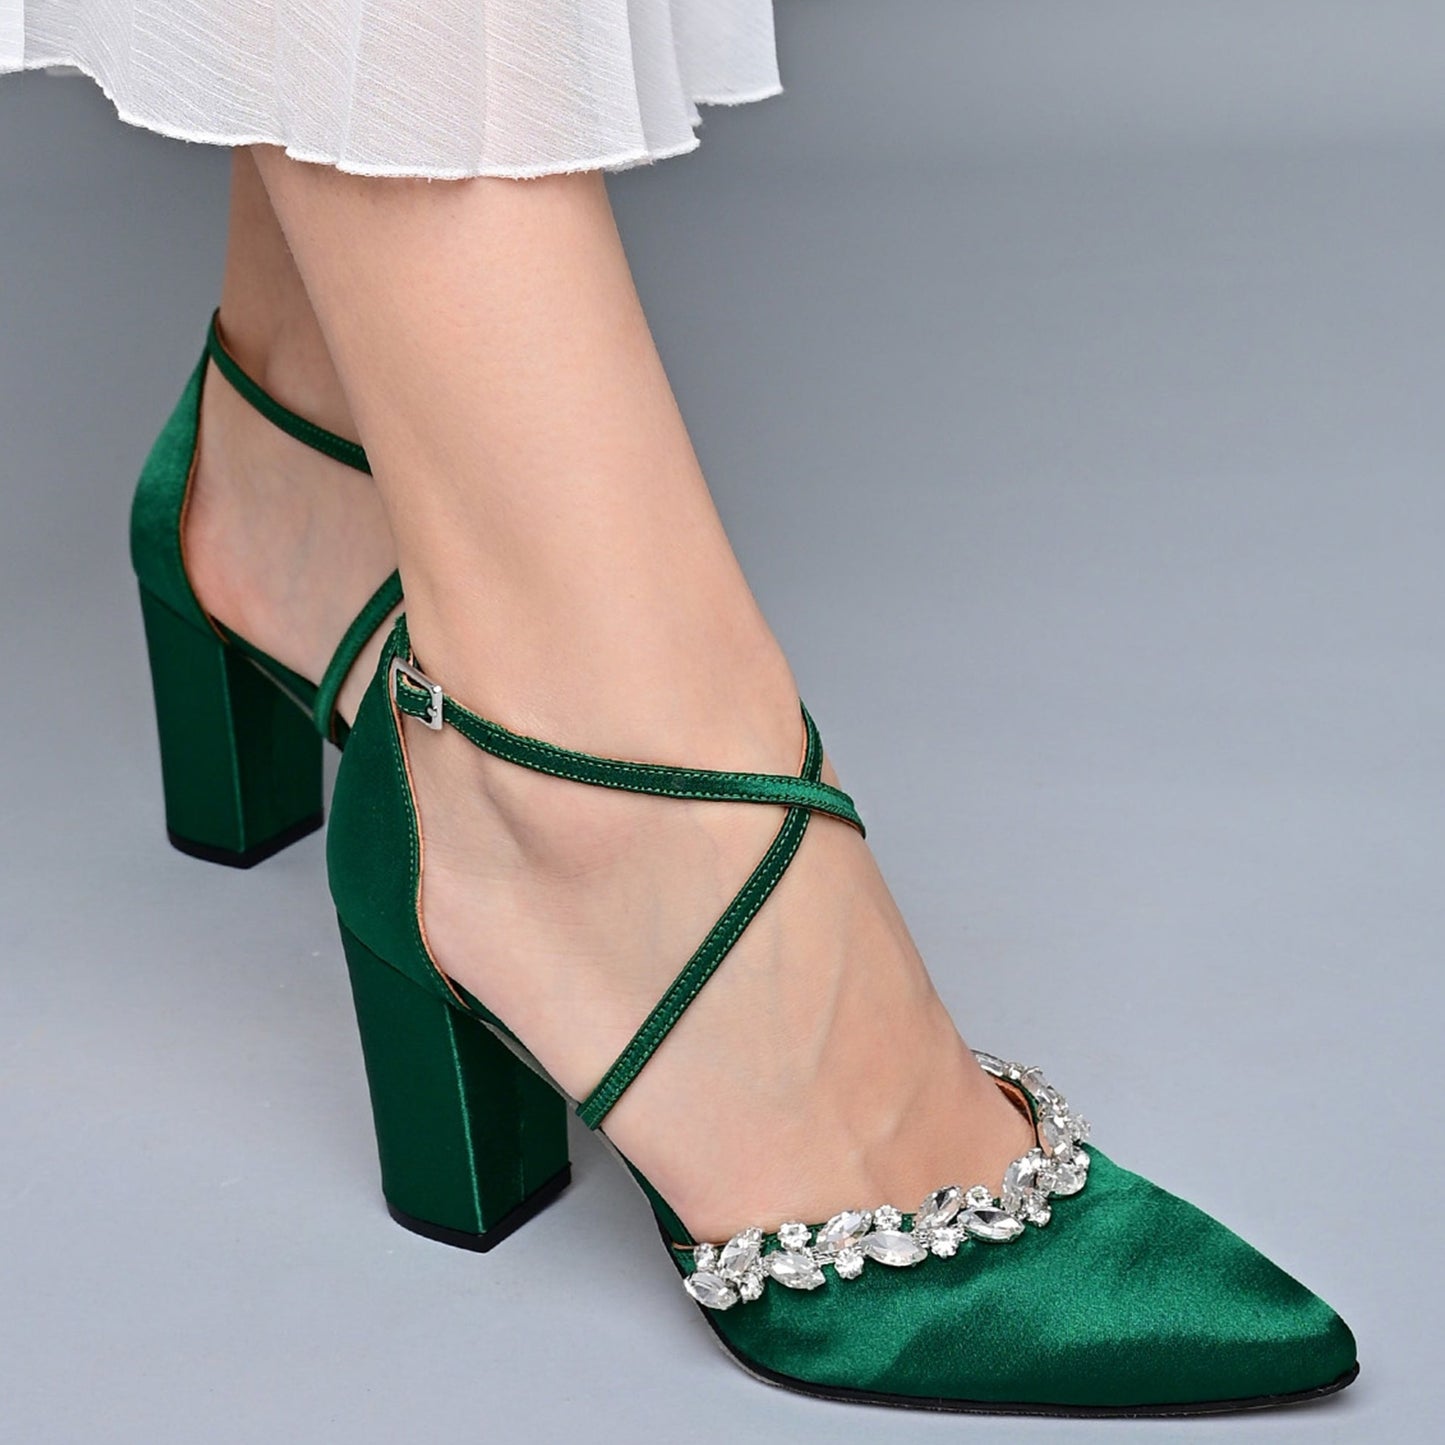 Buy Green Wedding Shoes With Pearl and Crystal Cascade Hunter Green Bridal  Shoes or PICK FROM 100 COLORS Green Wedding Heels Hunter Green Shoes Online  in India - Etsy